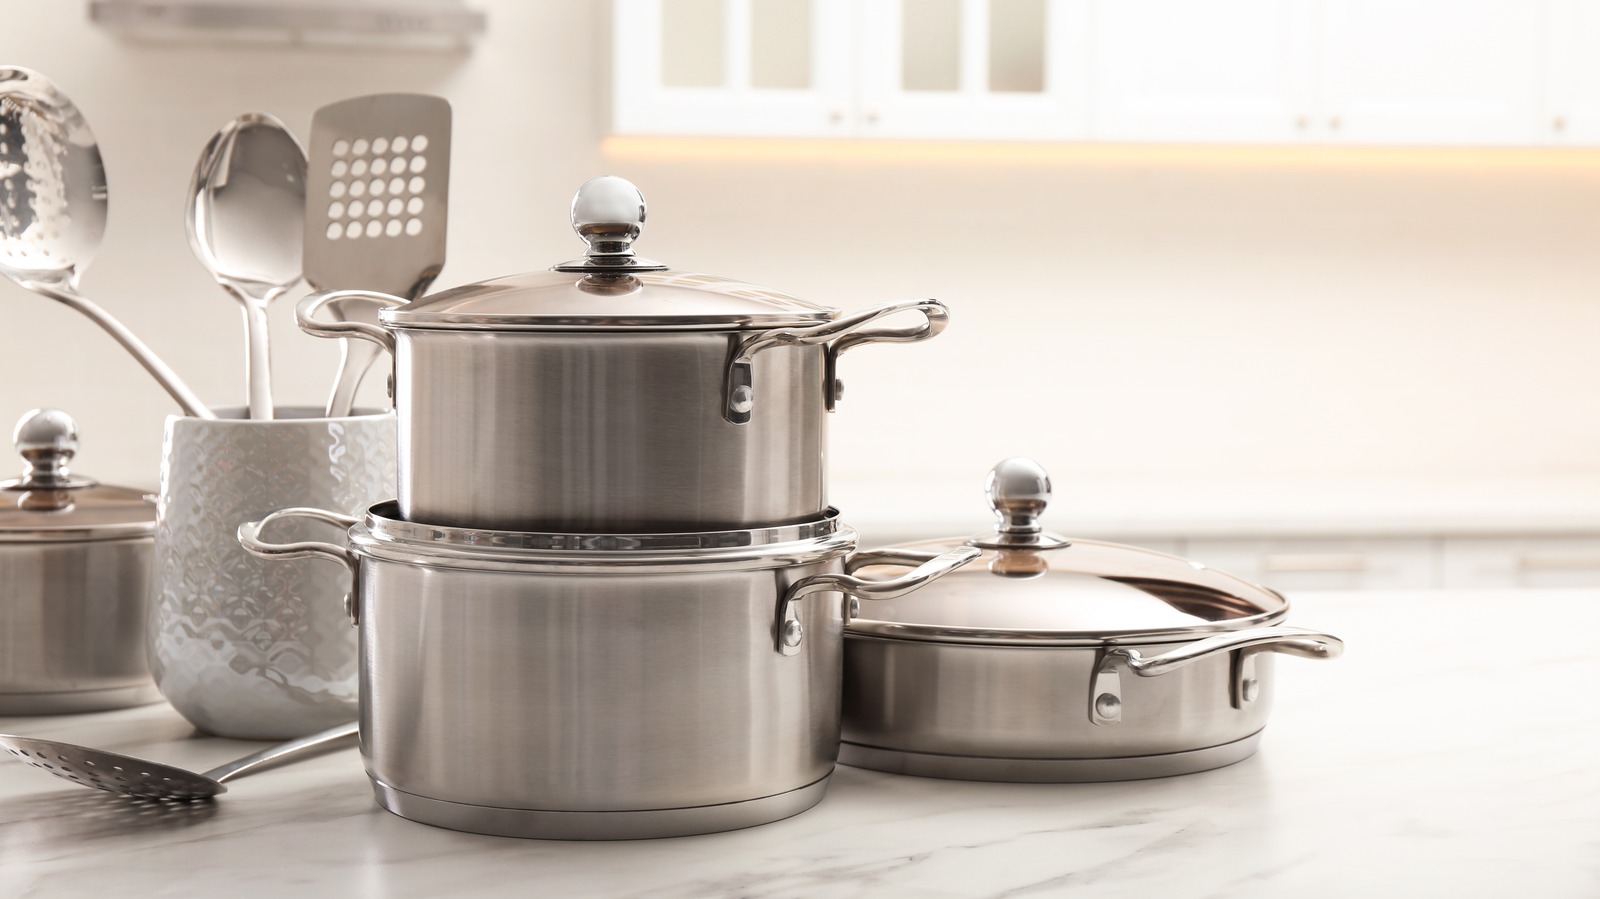 Get a Top-Rated 16-Piece Cookware Set for Just $84 on Prime Day